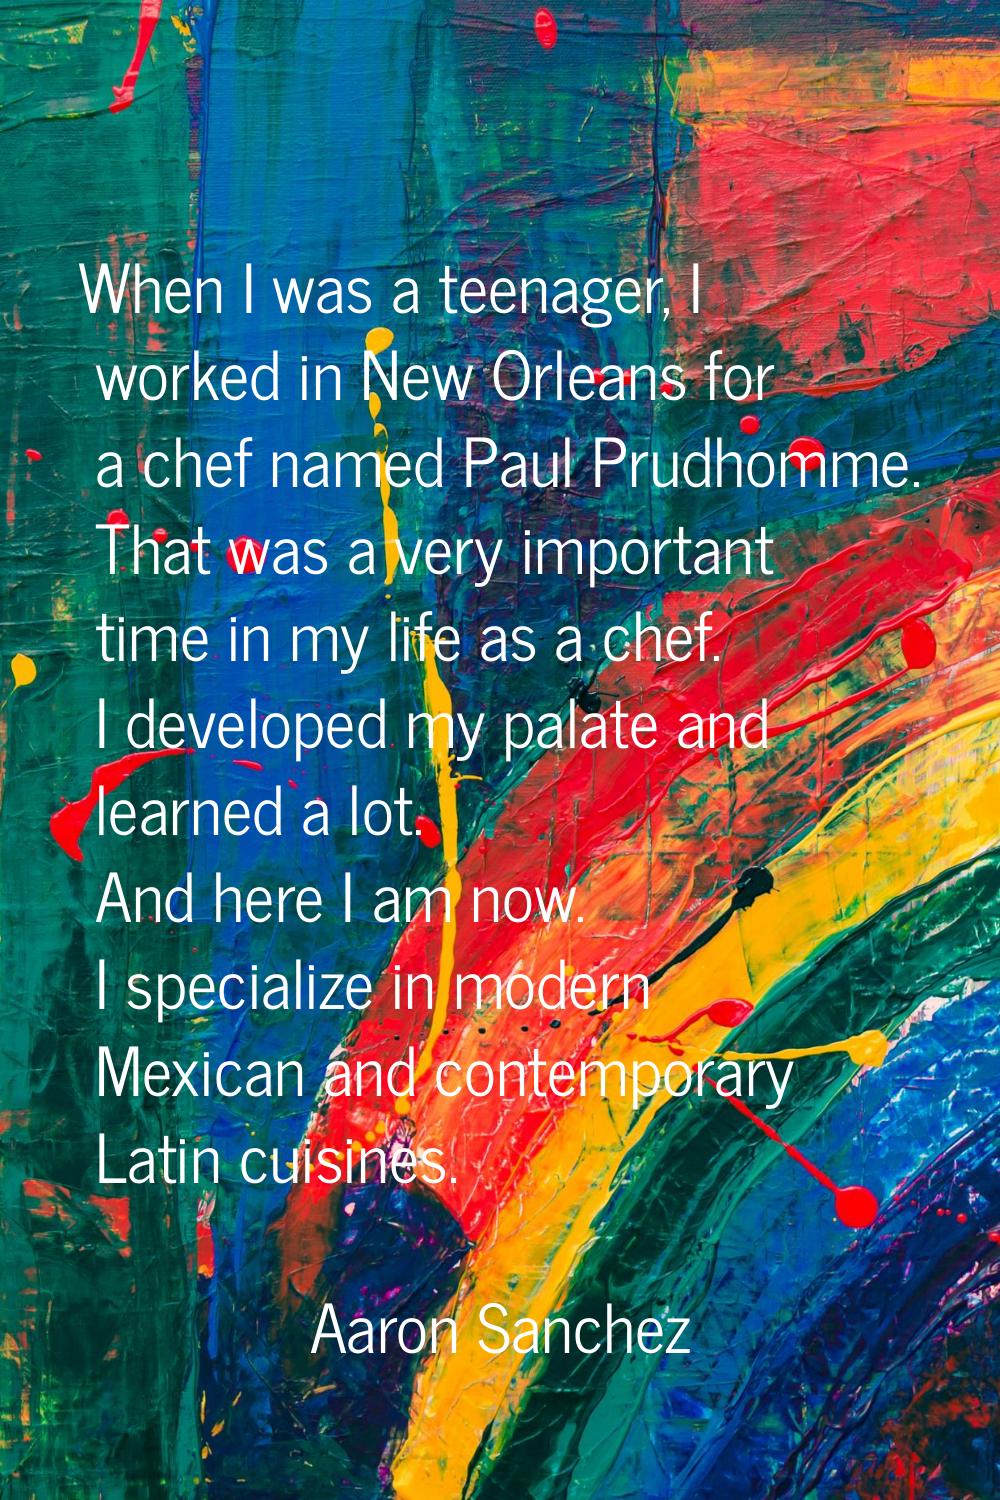 When I was a teenager, I worked in New Orleans for a chef named Paul Prudhomme. That was a very imp